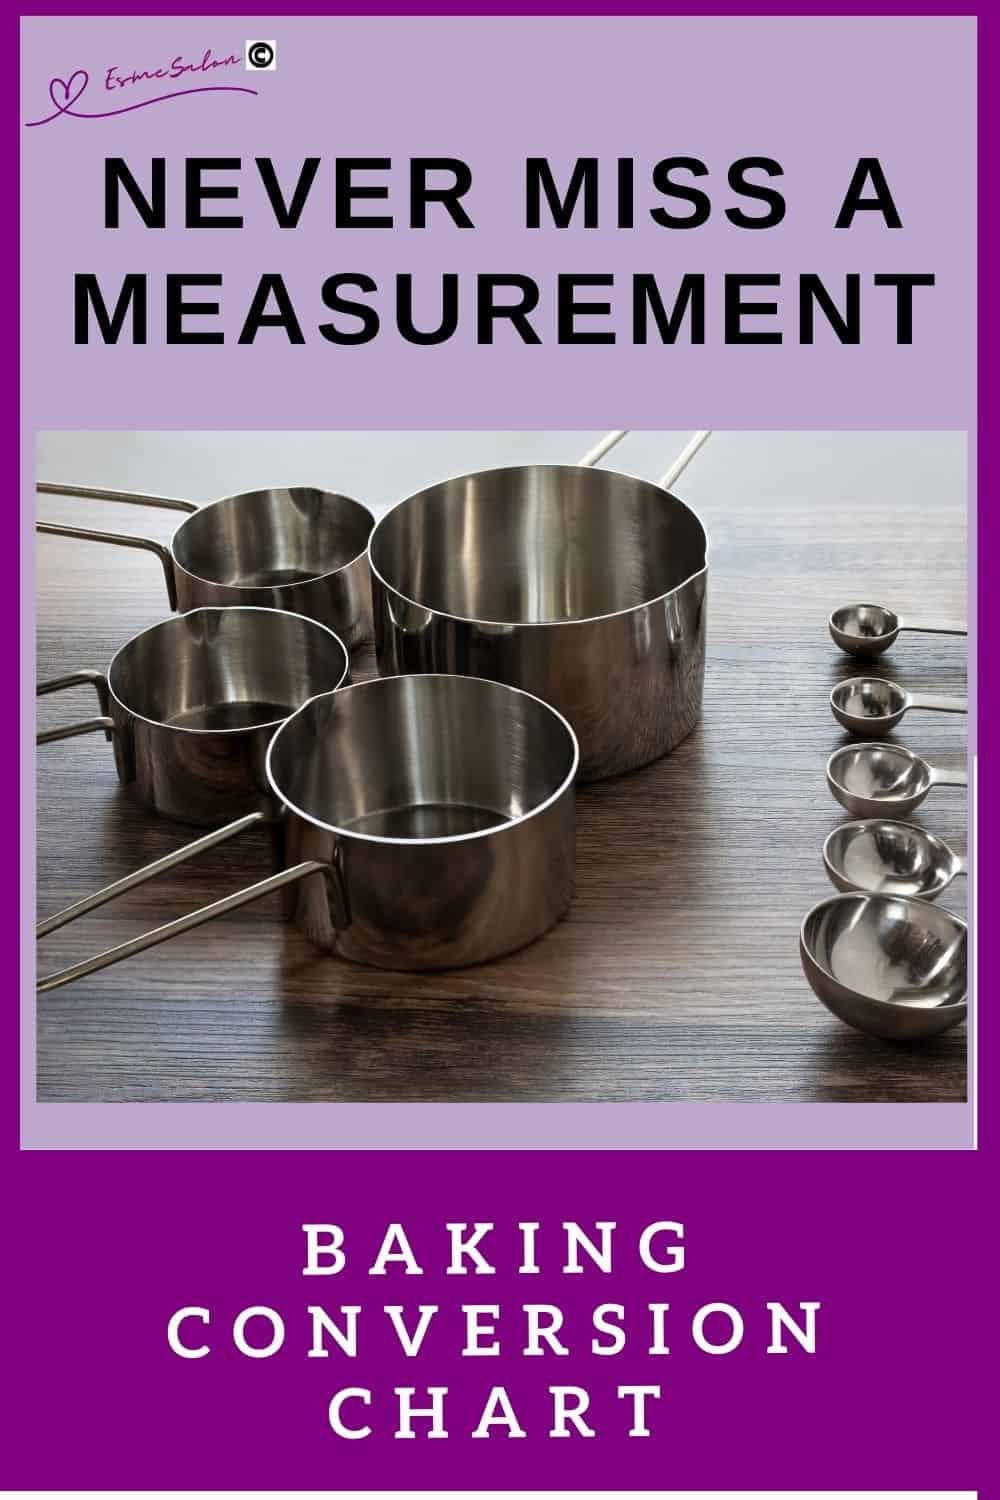 an image of metal measuring cups and spoons